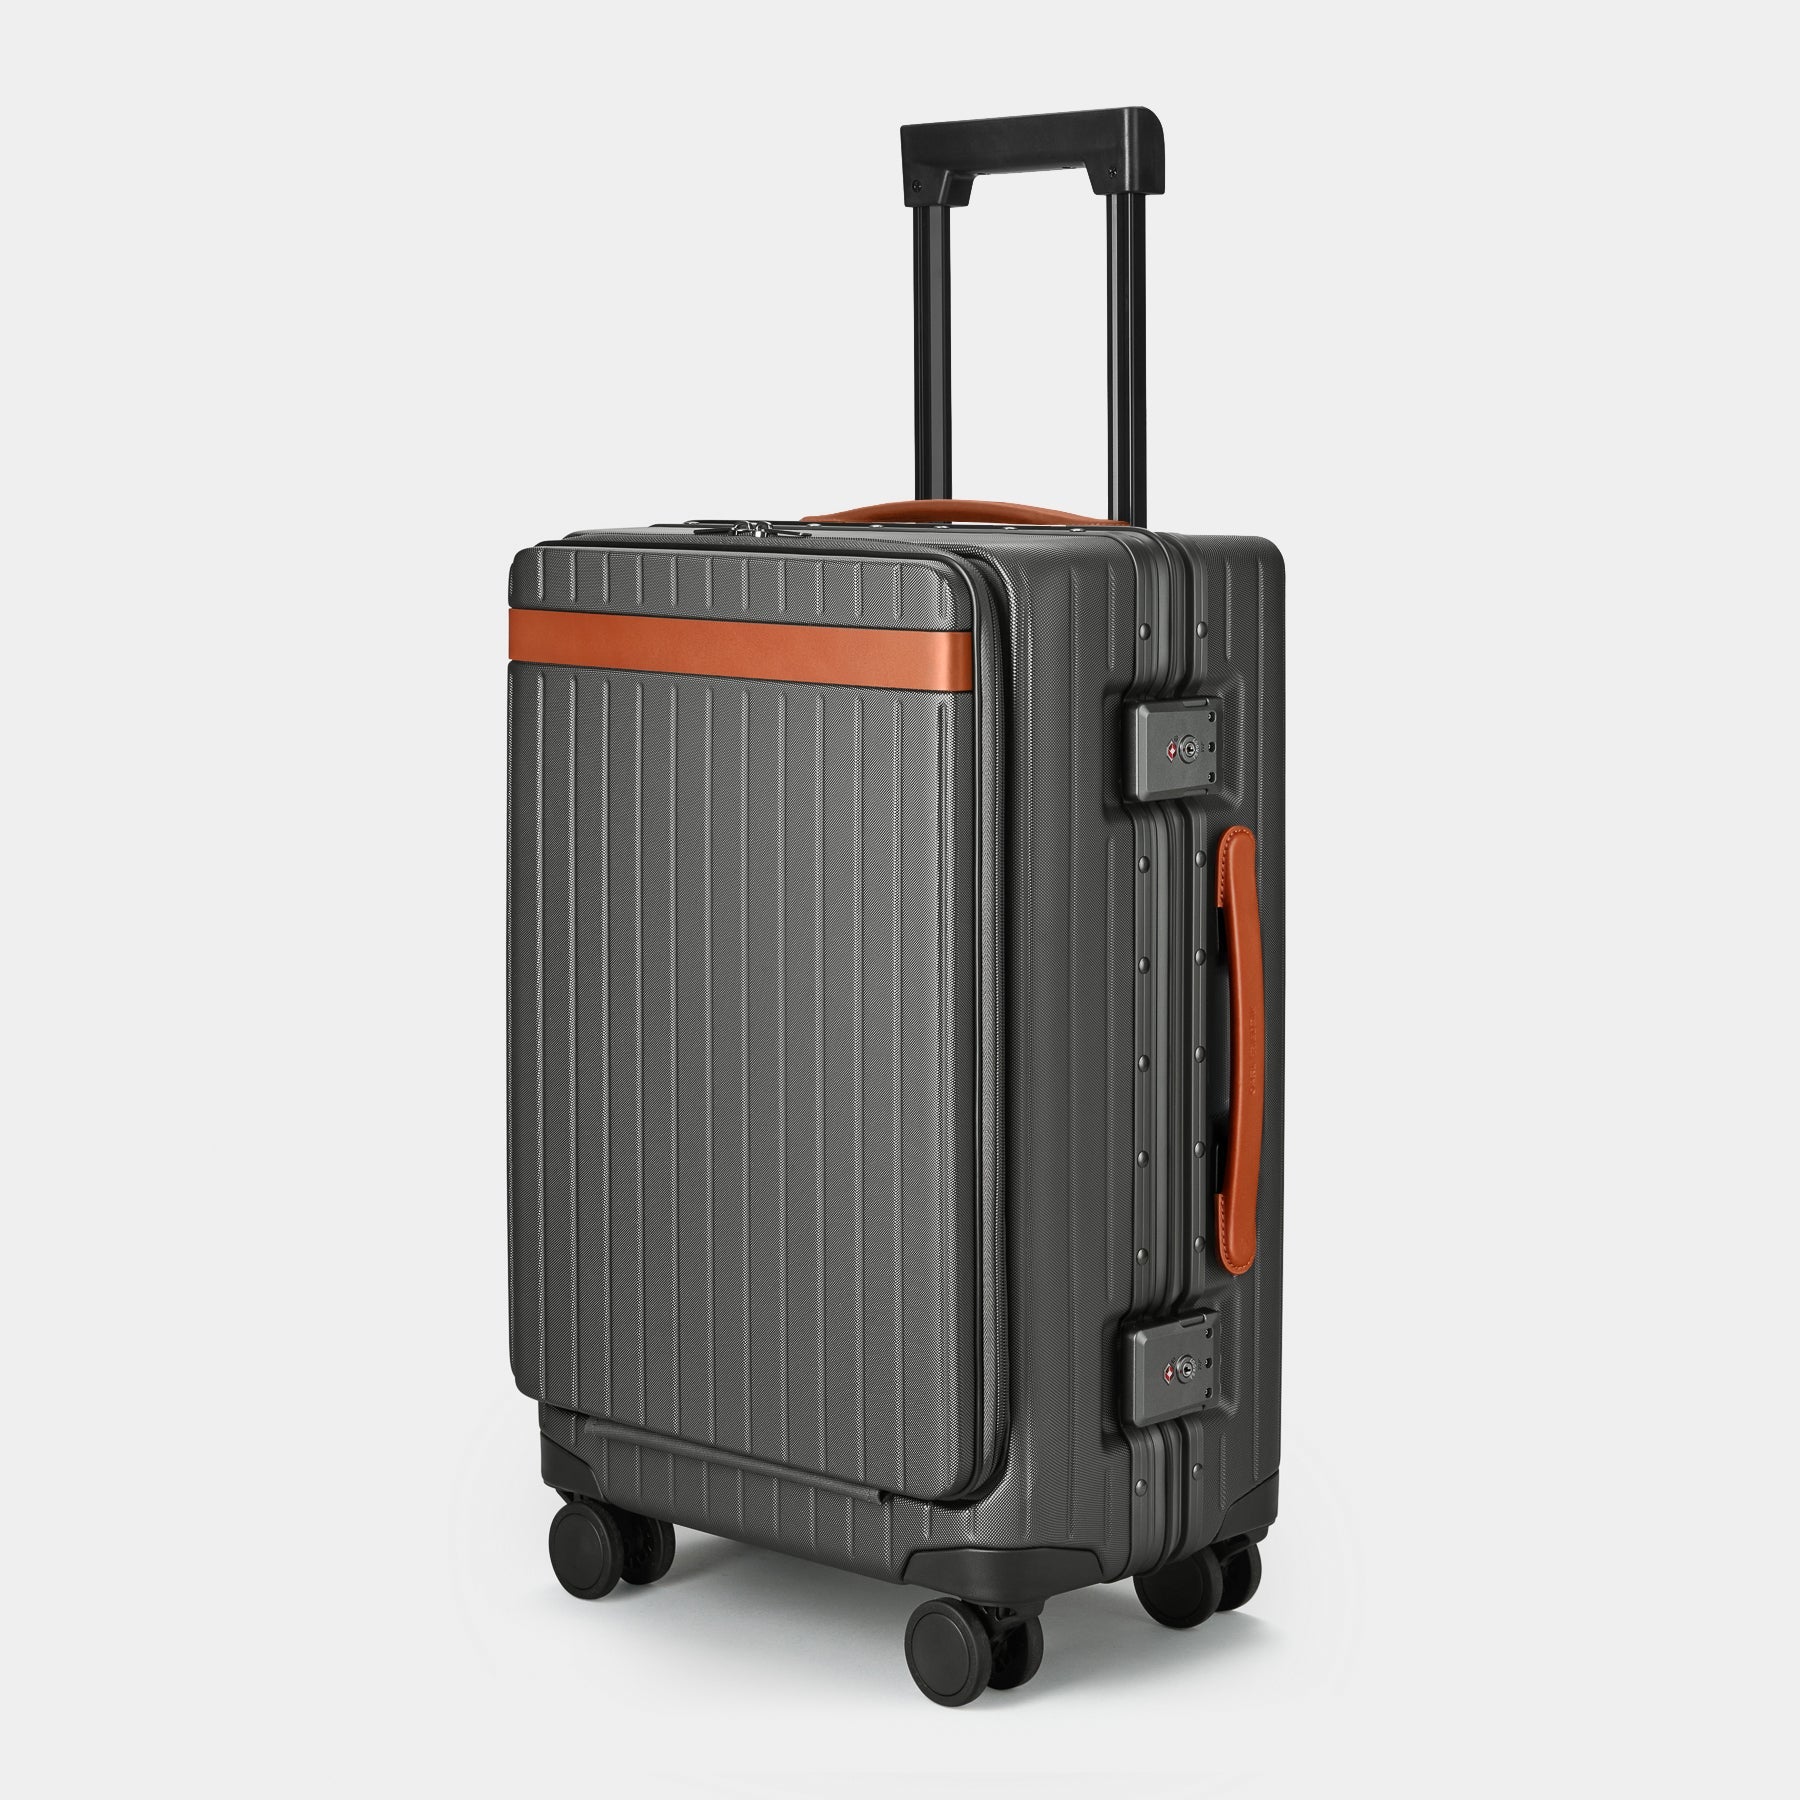 The Carry-on Pro - Return Cognac Polycarbonate carry-on suitcase - Fair Condition